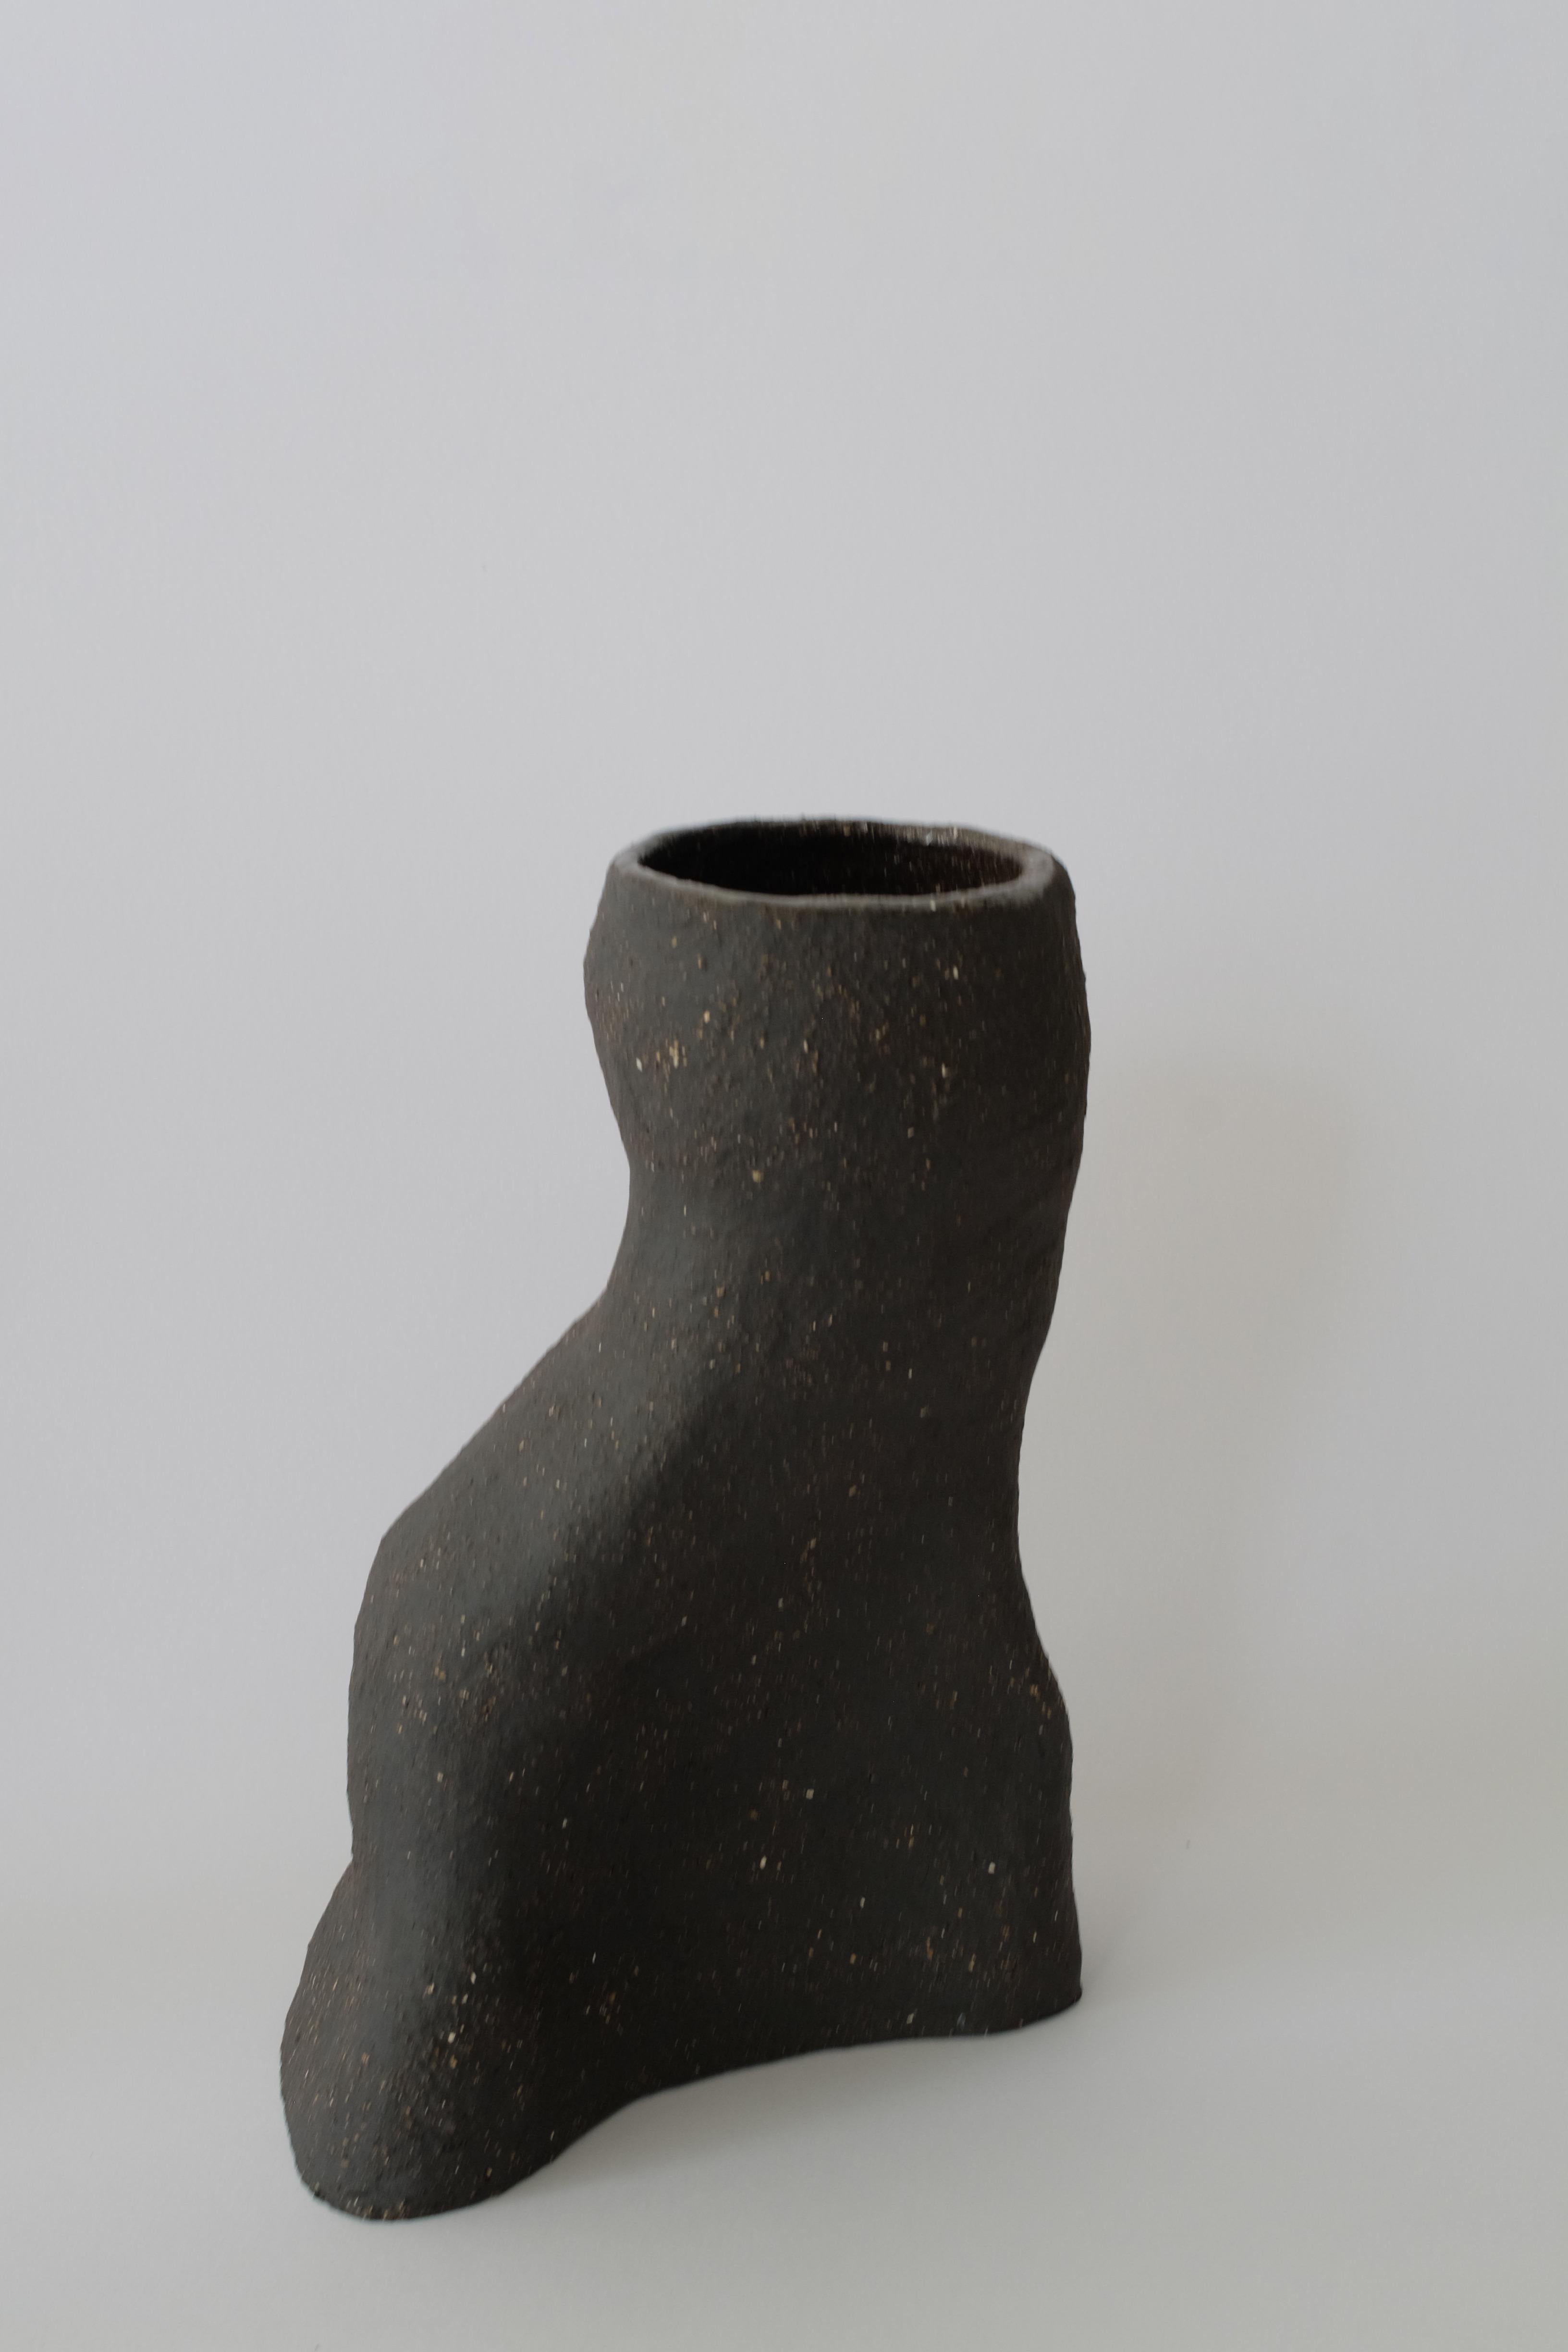 Meander Granite vase by Sophie Parachey
Dimensions: W 23 x D 14 x H 33 cm
Materials: Black textured stoneware (large chamotte).

Inspired by extended stays in Central America, Sophie Parachey’s work questions transformation, the antagonism